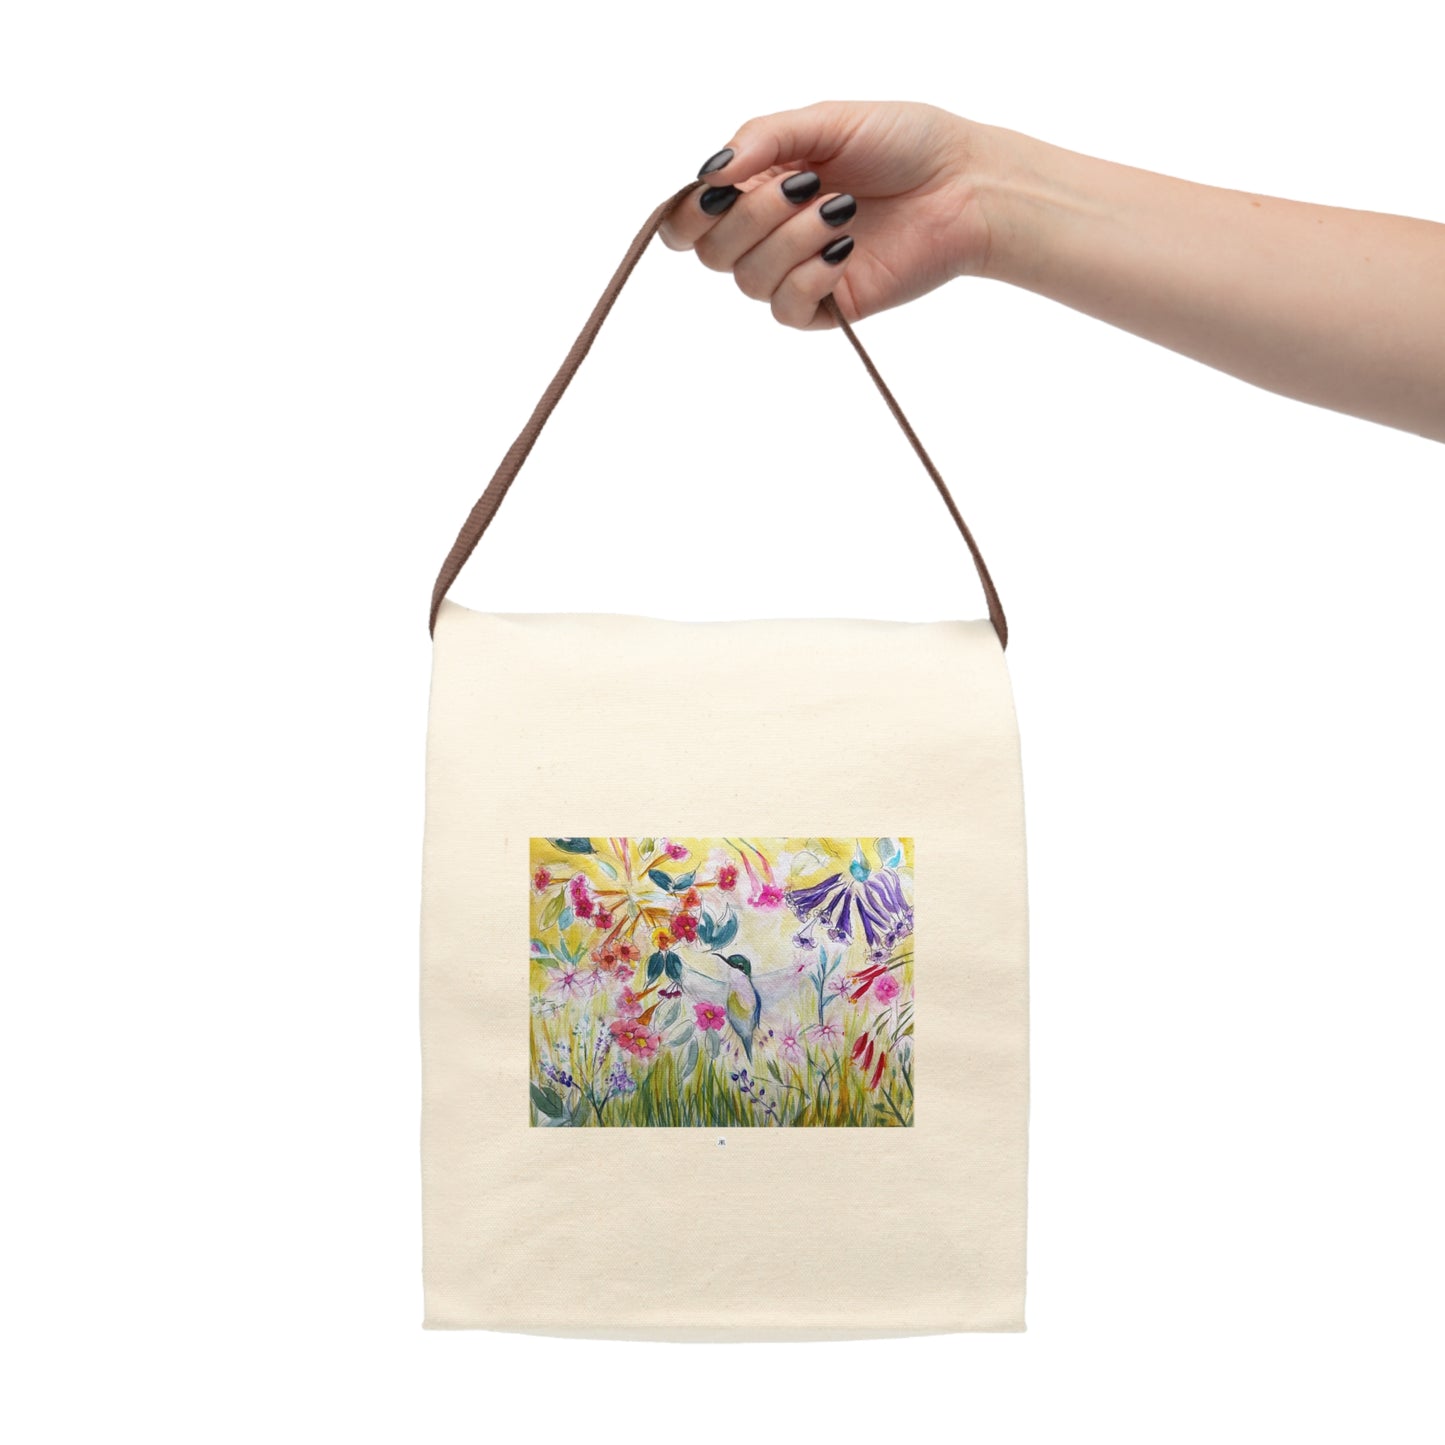 Hummingbird in a Tube Flower Garden Pretty Canvas Lunch Bag With Strap